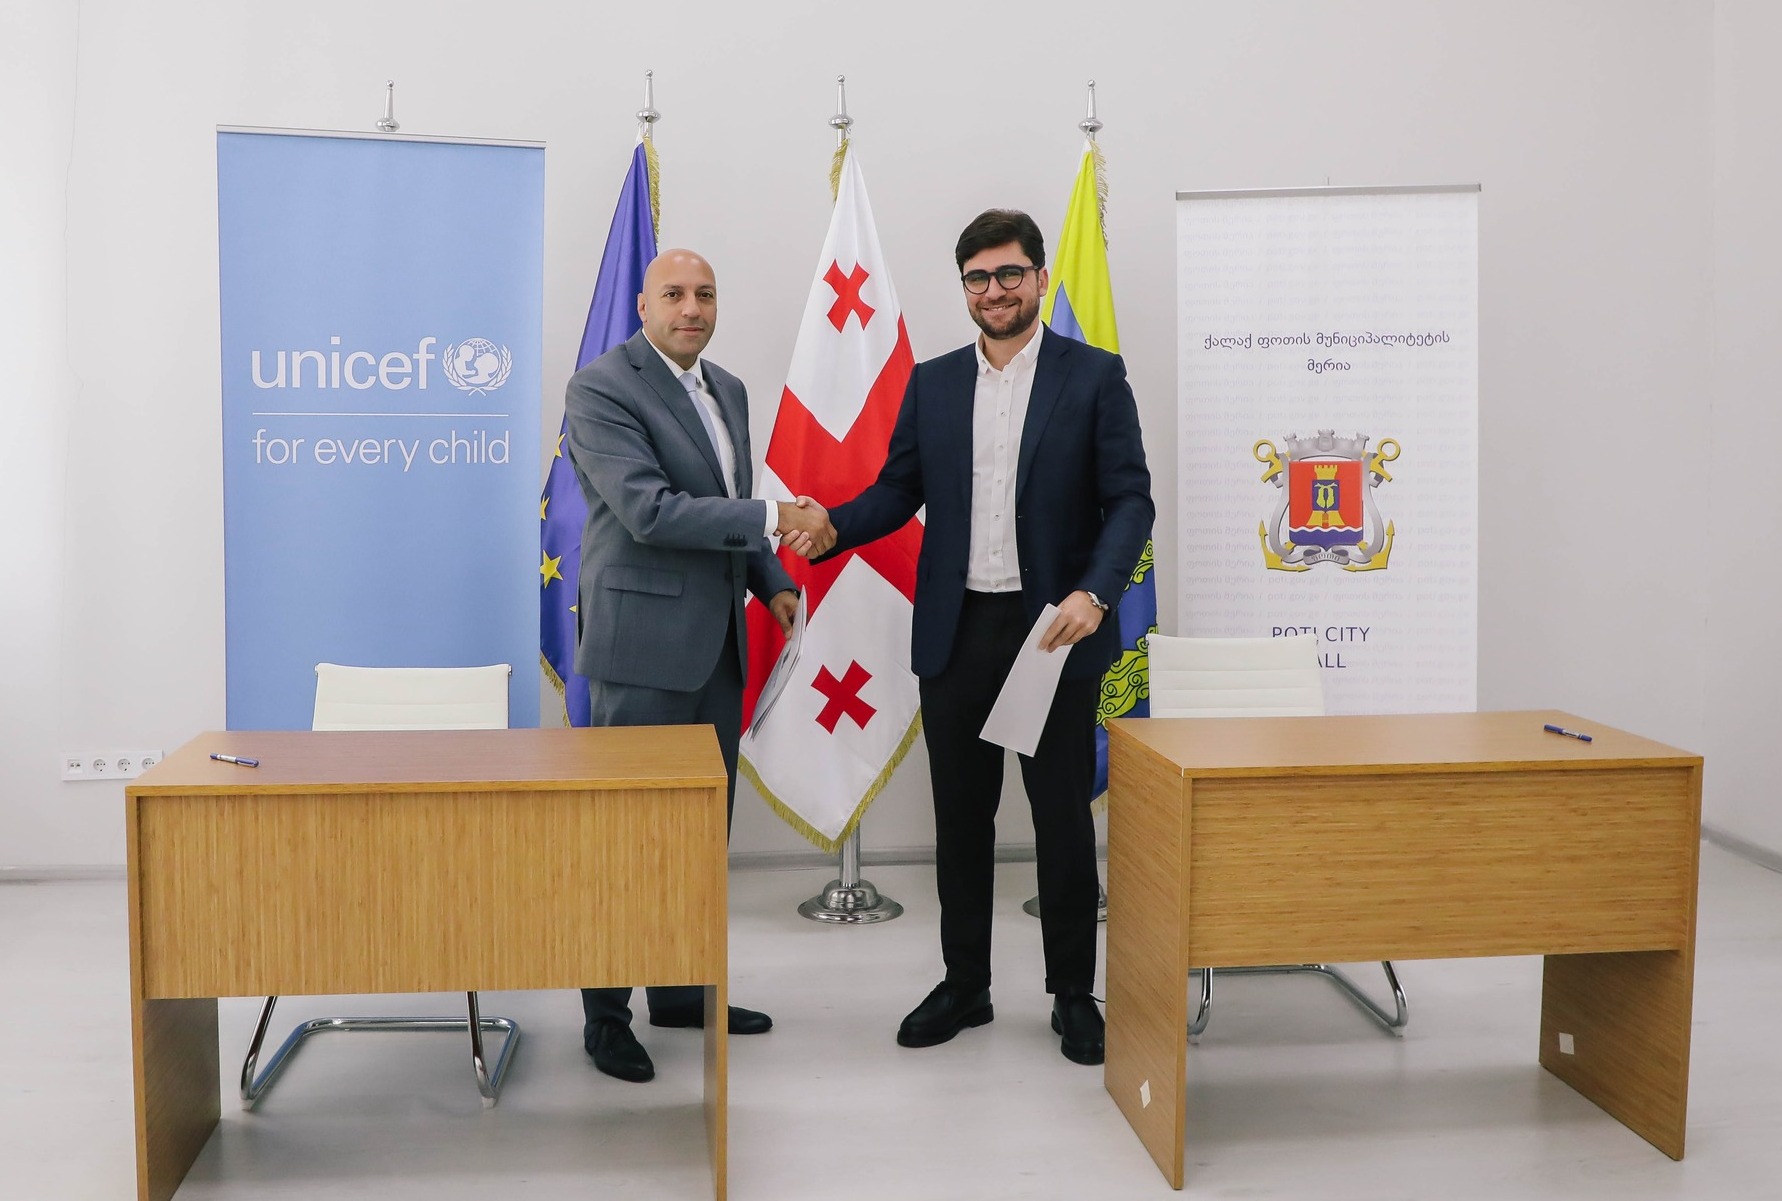 UNICEF welcomes Poti city decision to join the Child Friendly City initiative